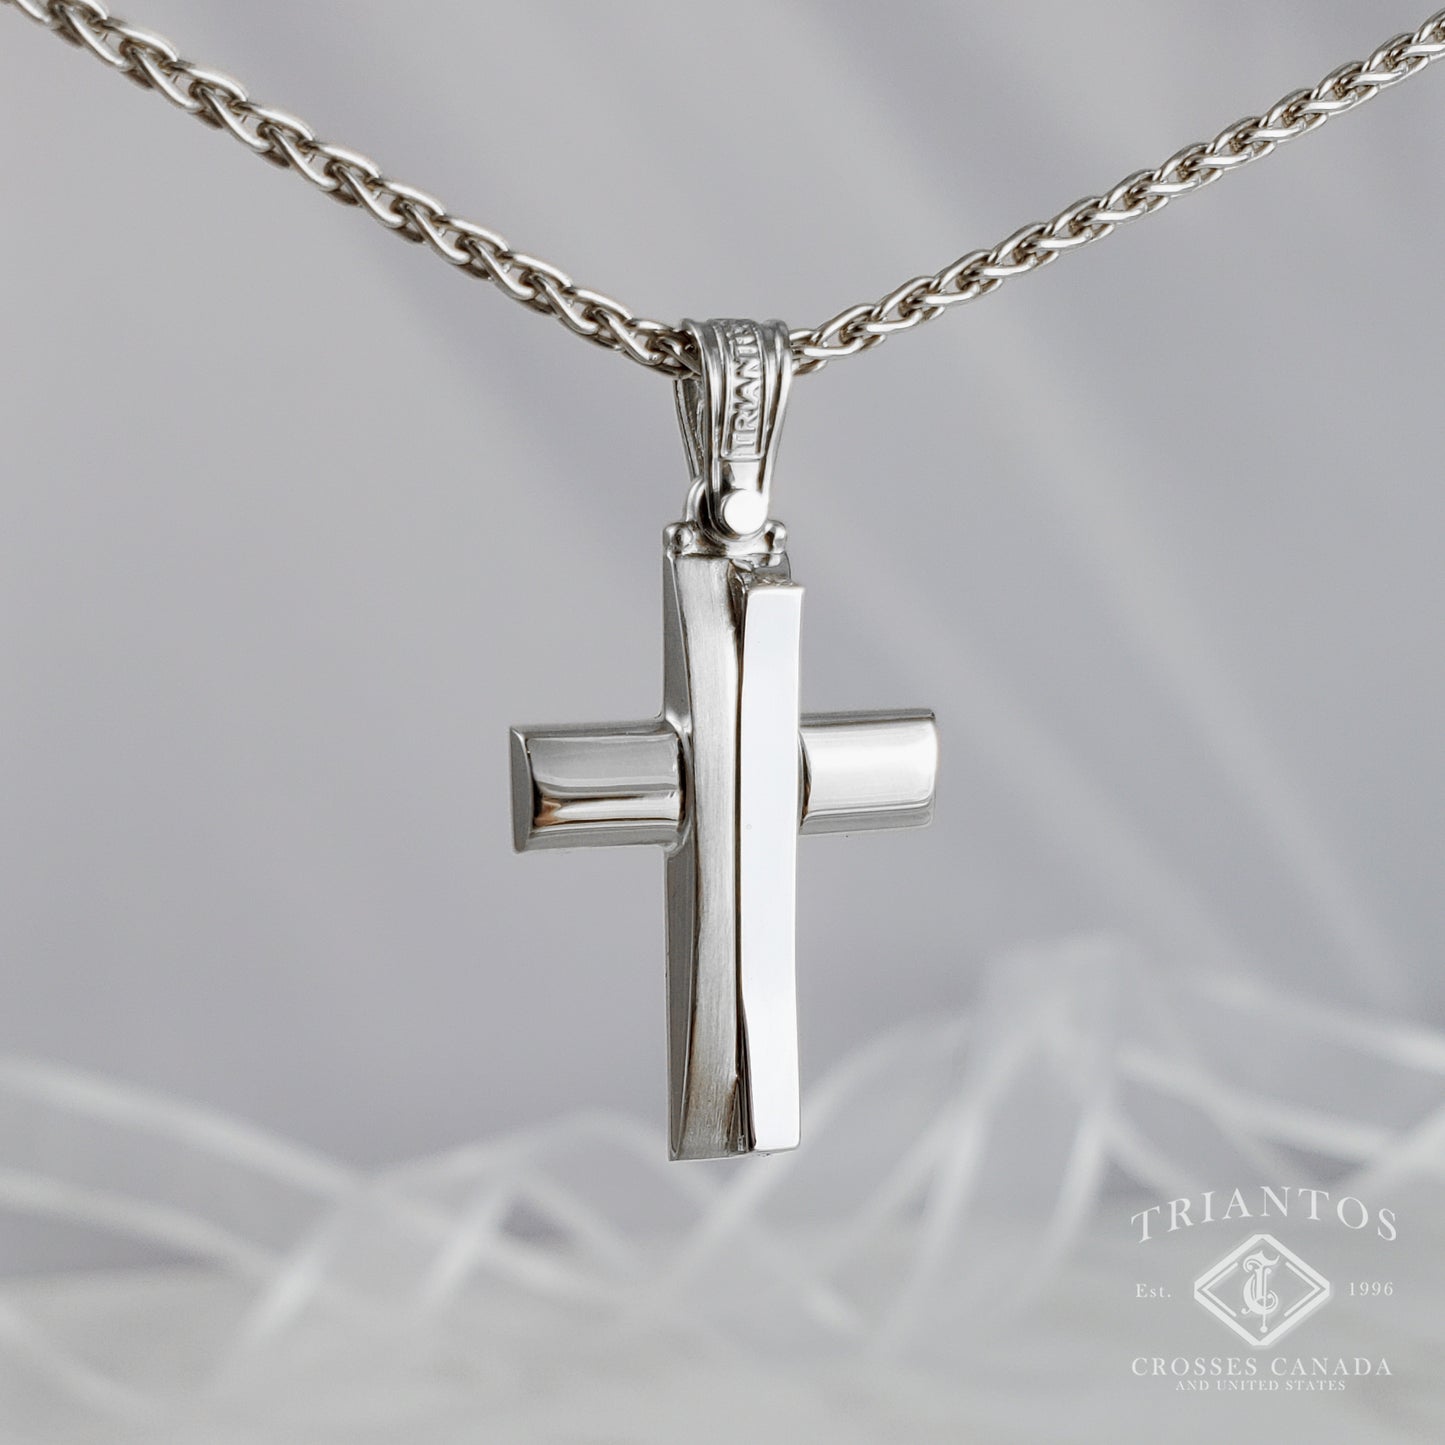 Modern 14K White Gold Triantos Cross Abstract Levels